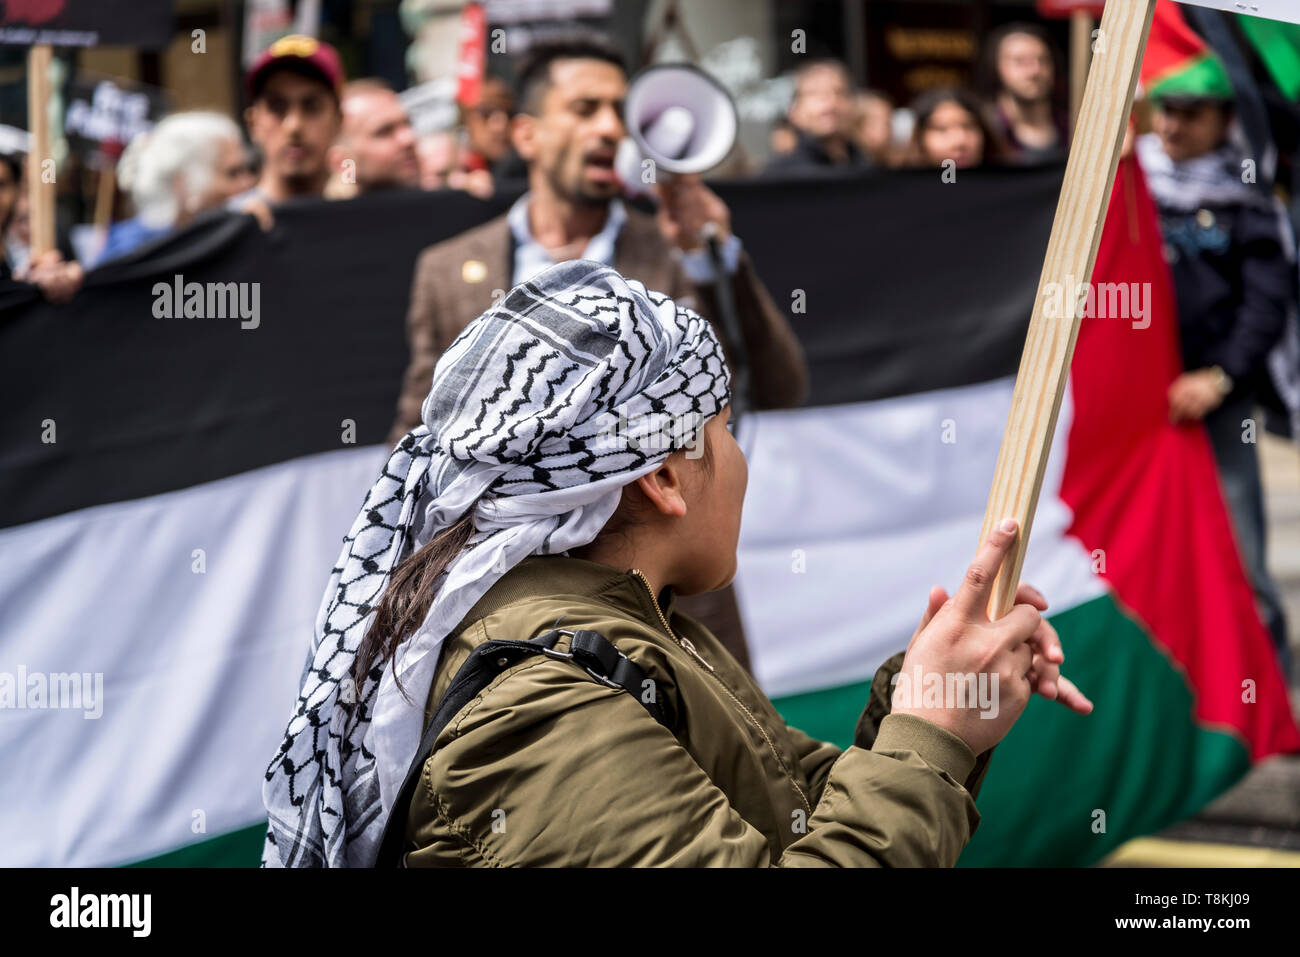 National Demonstration for Palestine, Nine year old Palestinian girl carrying a banner, London, UK 11/05/2019 Stock Photo